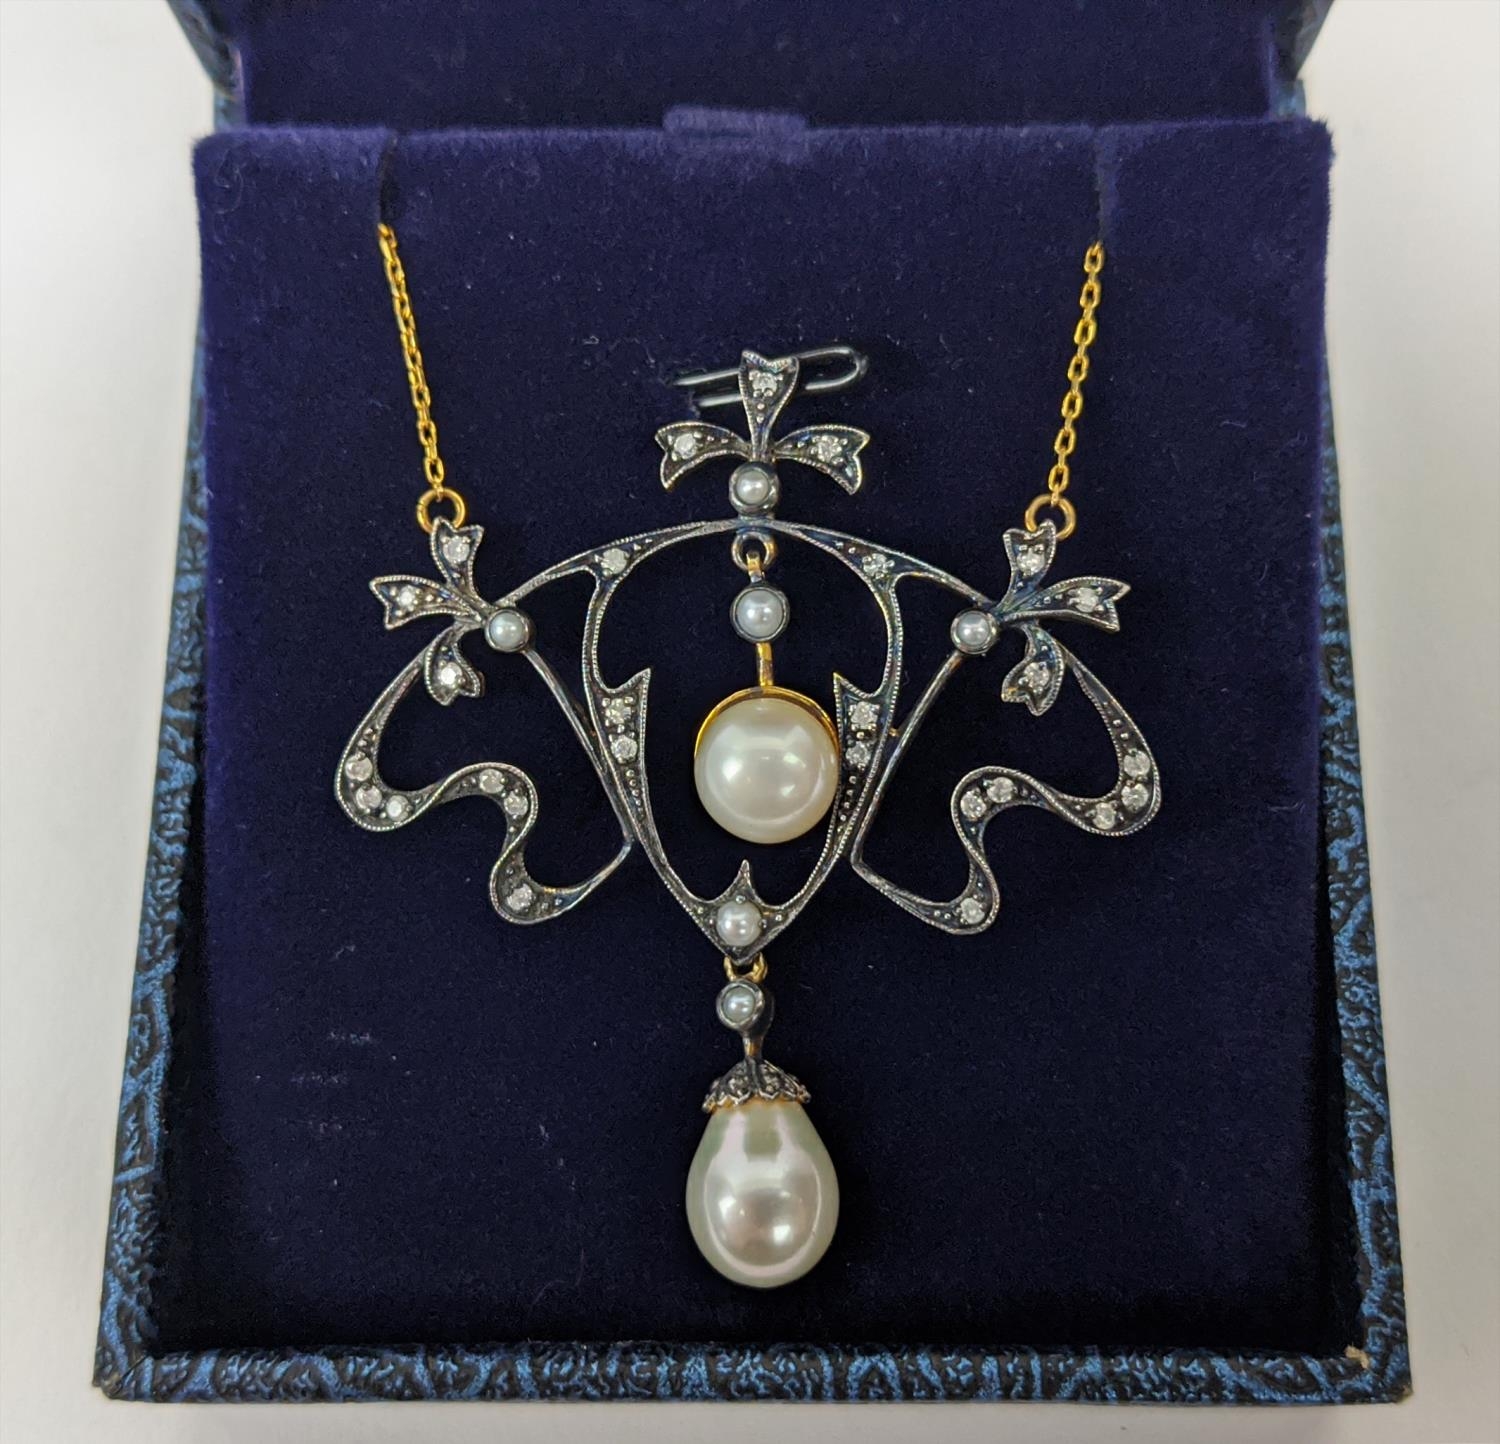 AN ART NOUVEAU STYLE 9CT WHITE AND YELLOW GOLD PENDANT NECKLACE, set with diamonds and pearls,